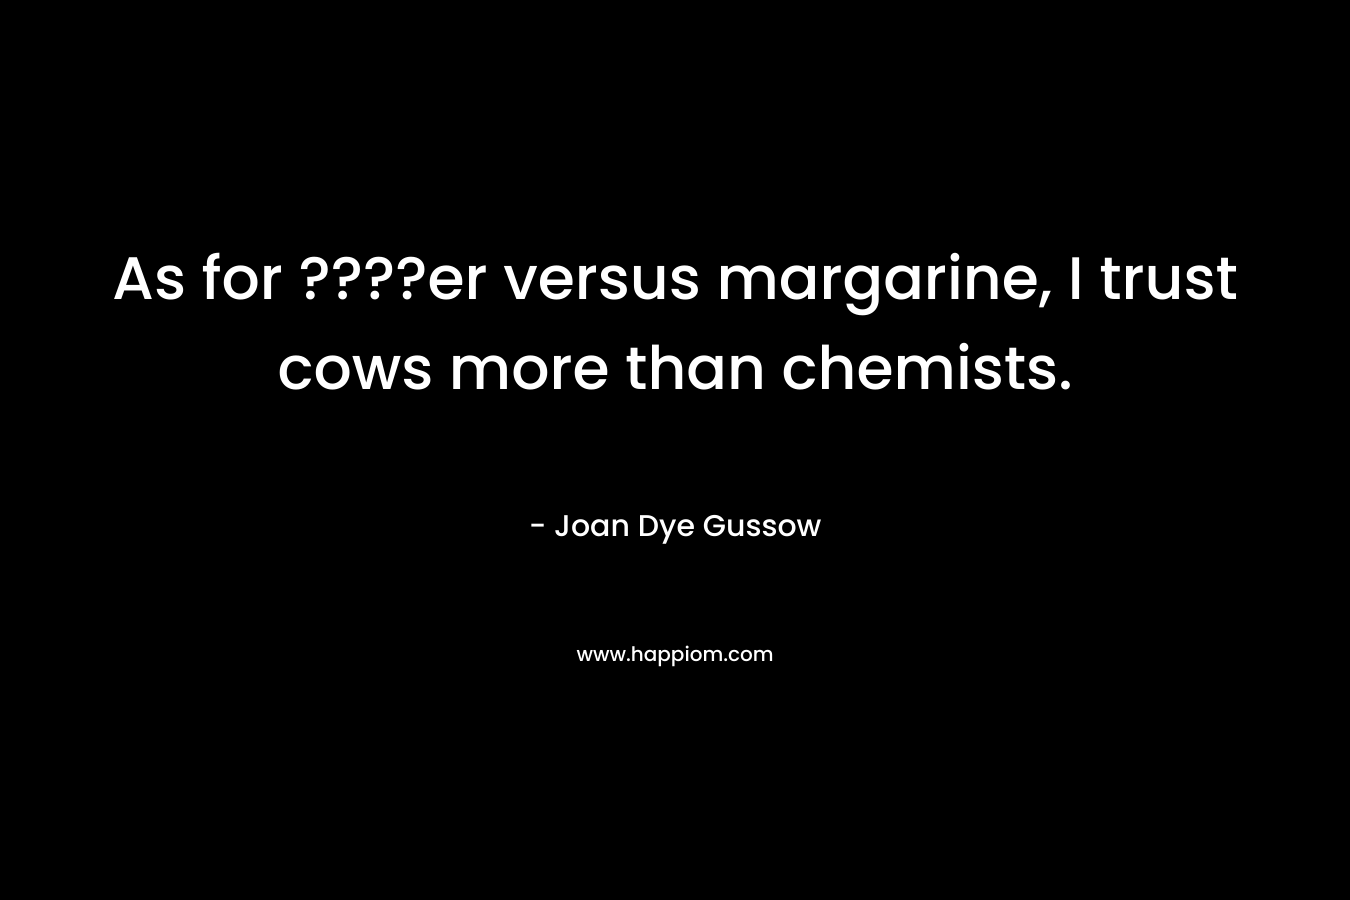 As for ????er versus margarine, I trust cows more than chemists.